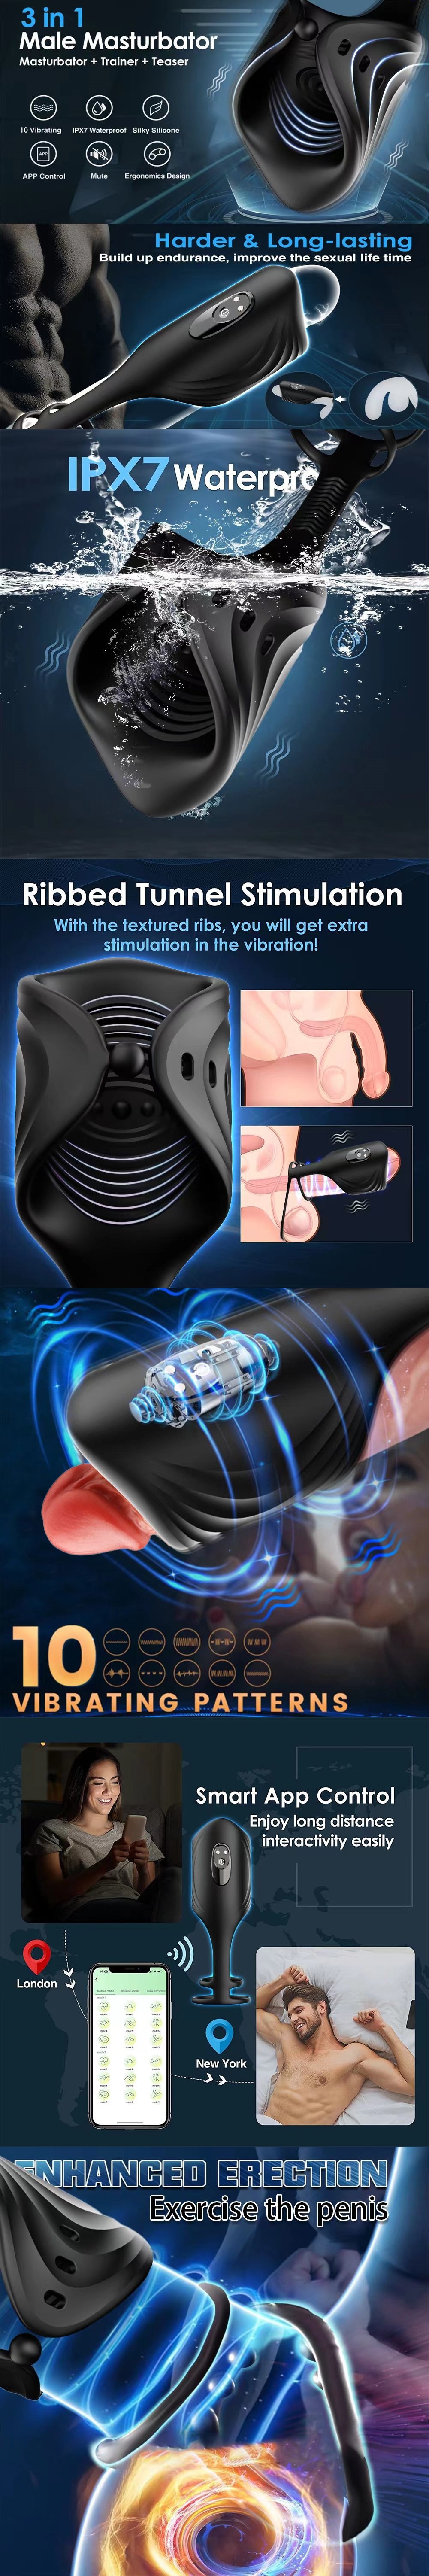 Cock Ring Vibrator Penis Trainer Male Sex Toy with APP Control